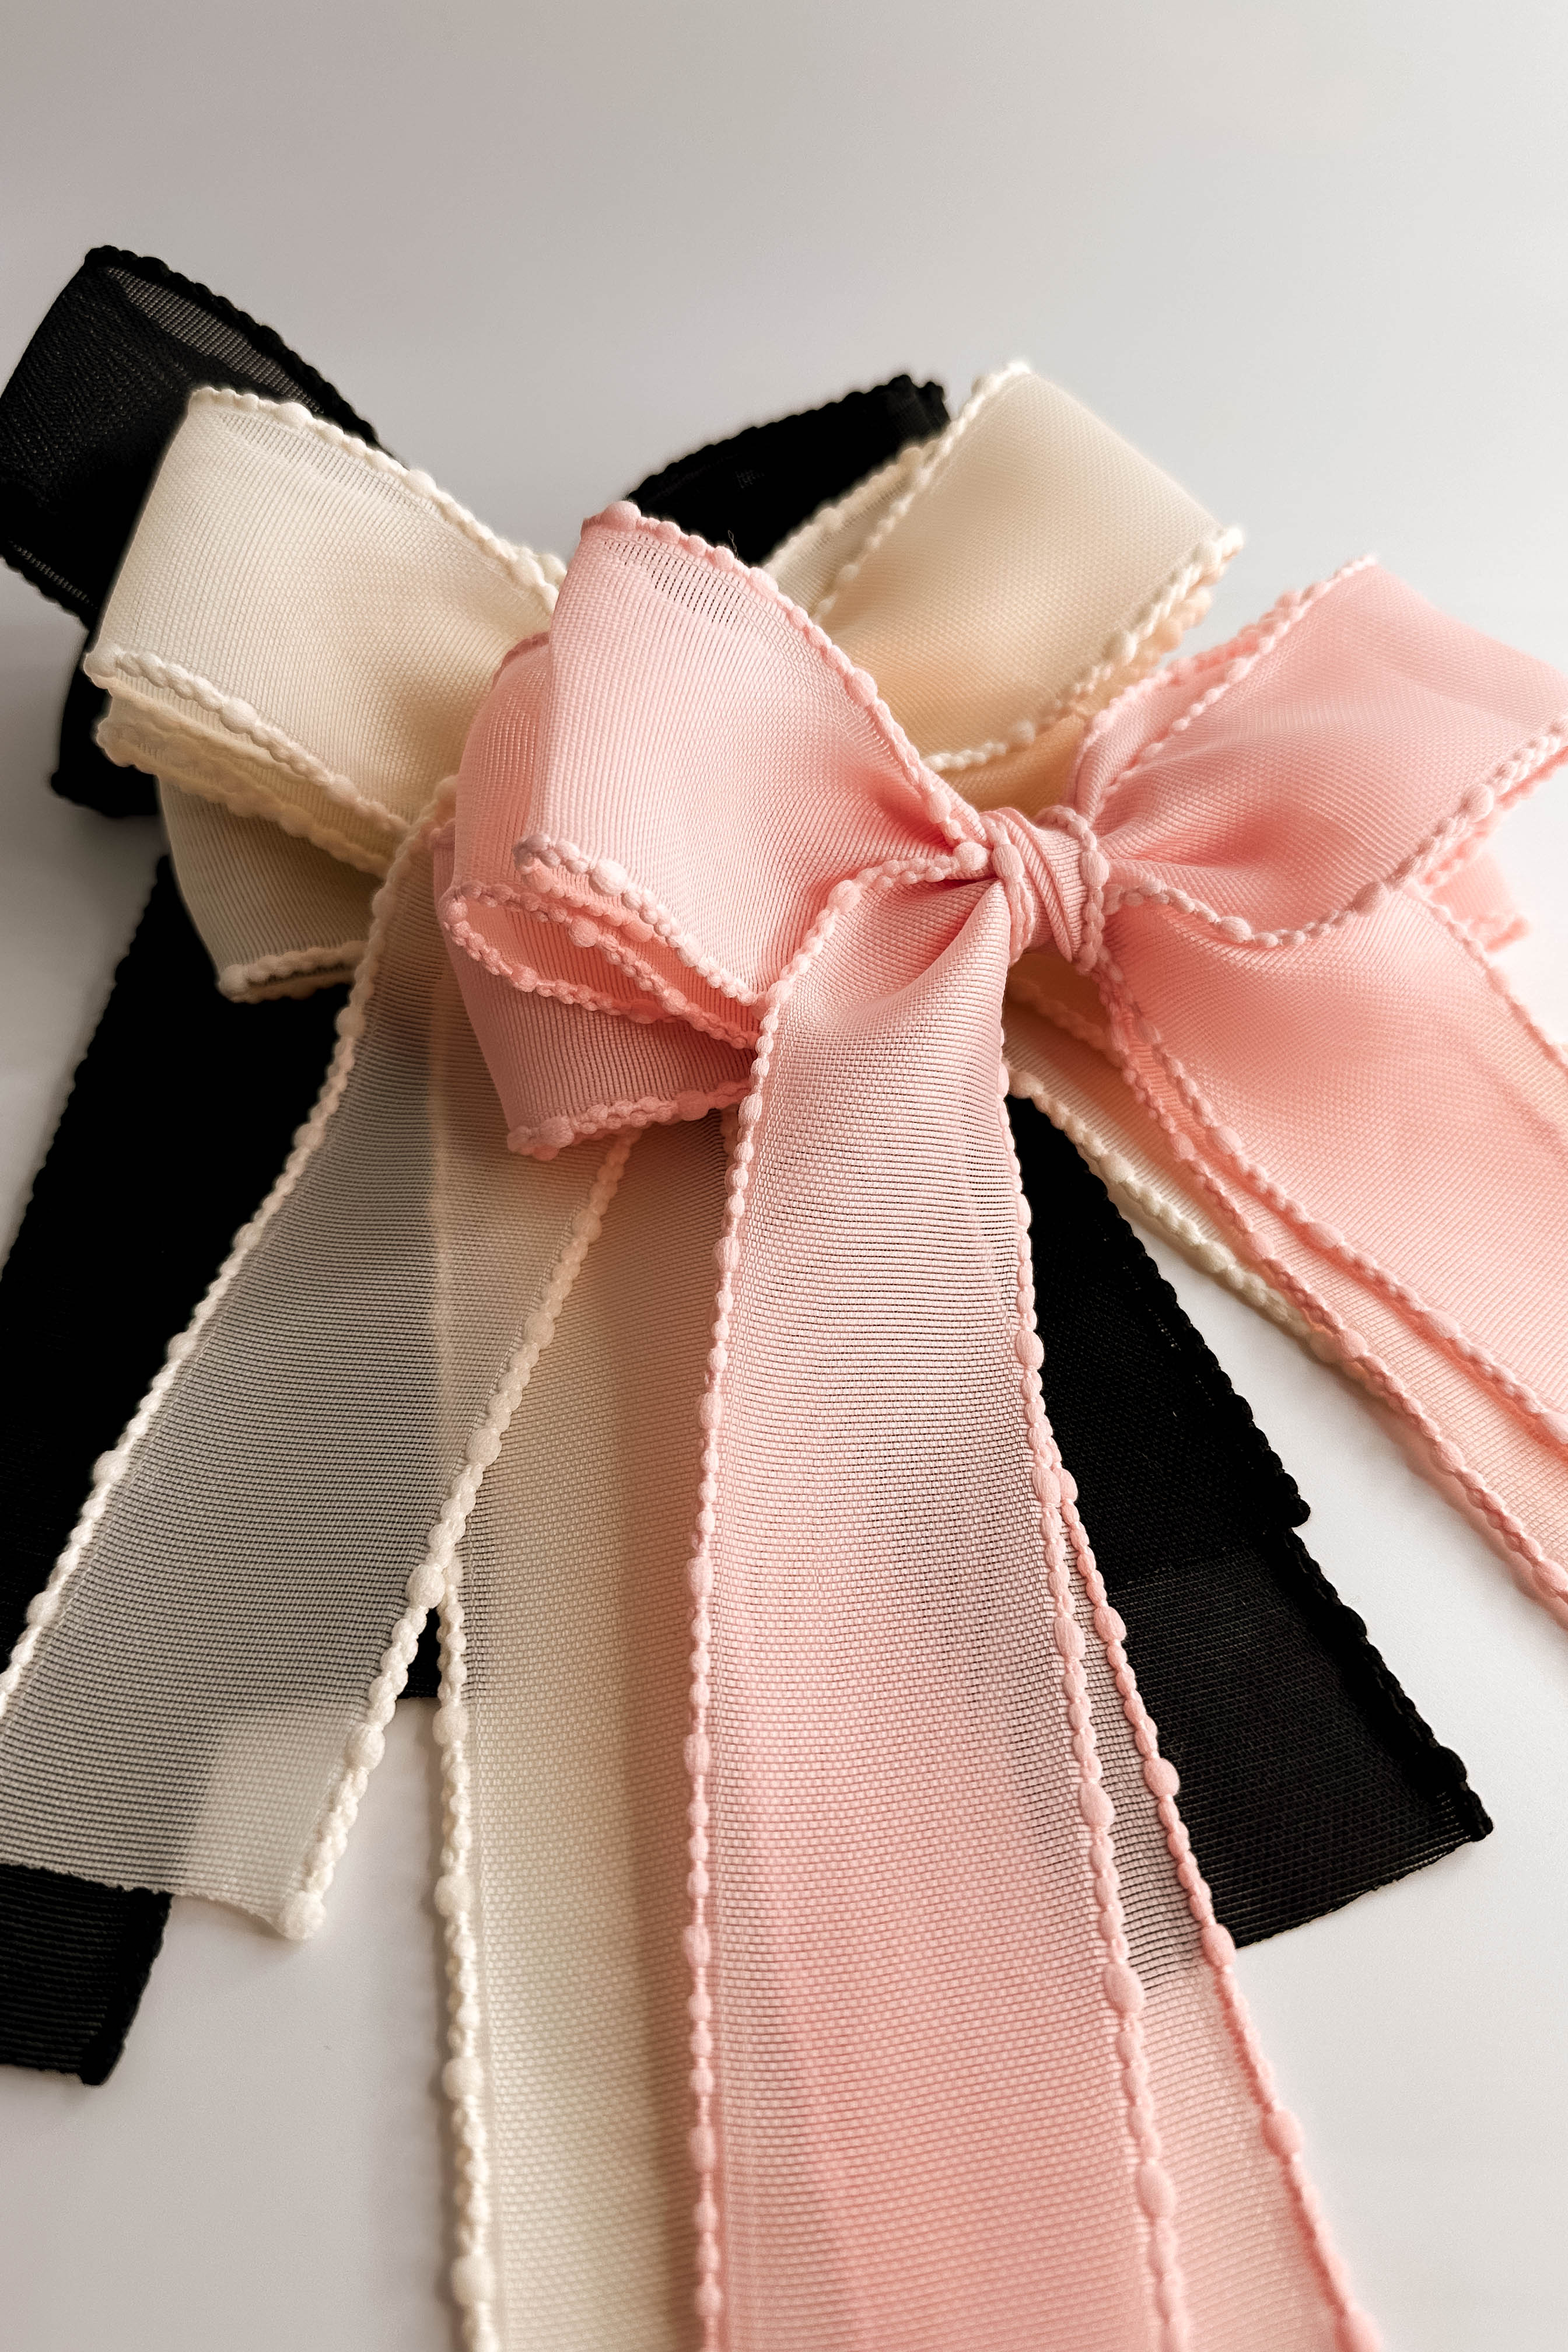 Close up view of the Harper Sheer Hair Bow Barrette in Black, Ivory, and Pink layered one each other against white background.